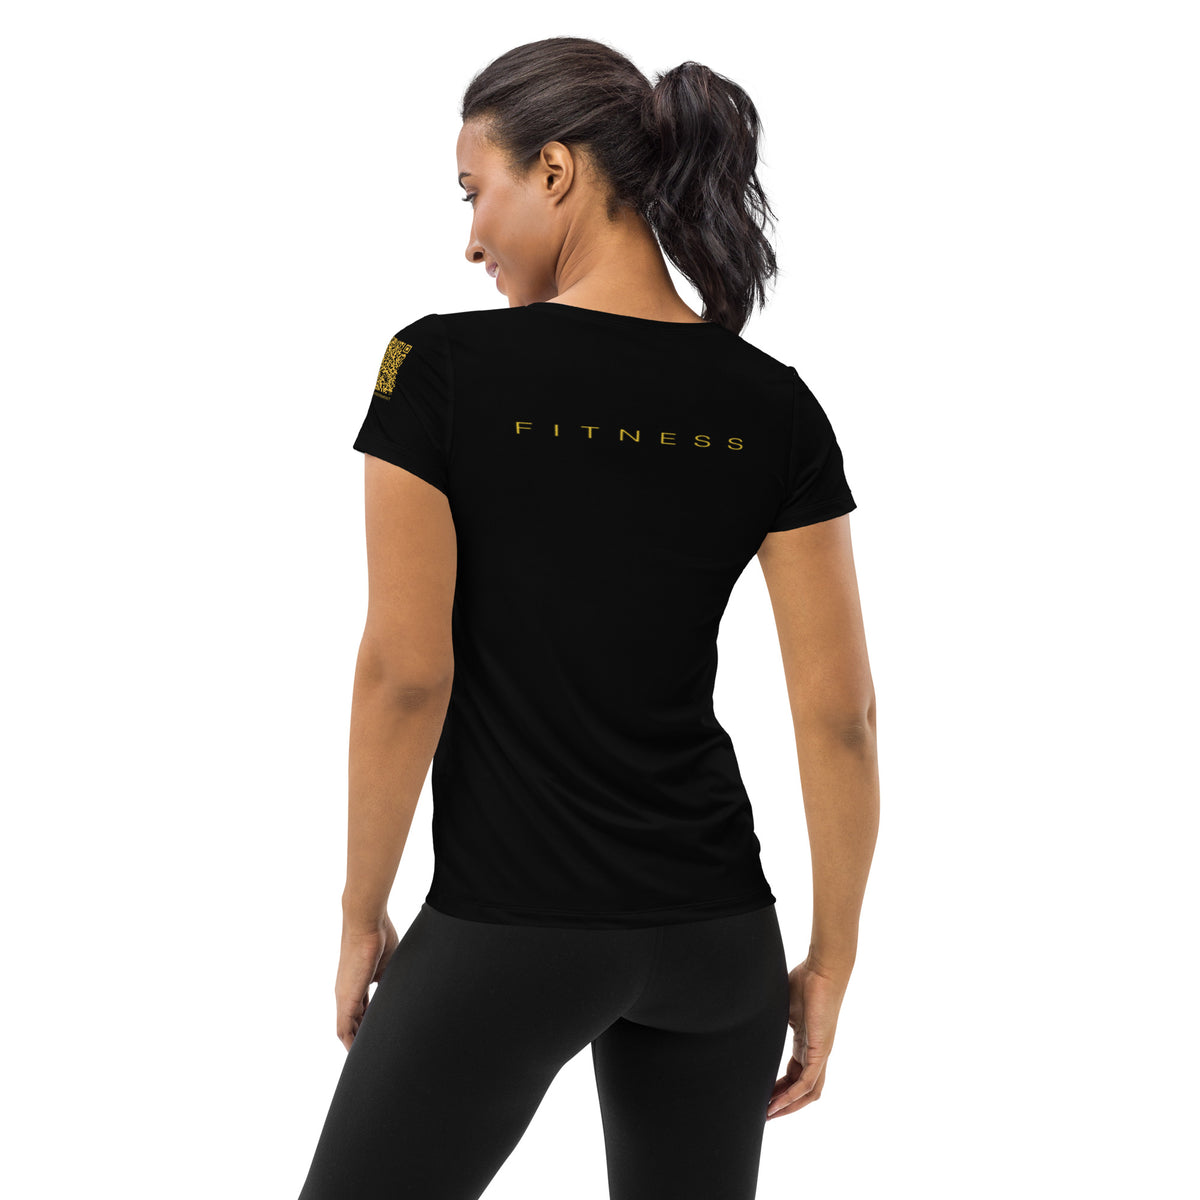 Woman Fitness Trainer All-Over Print Women's Athletic T-shirt